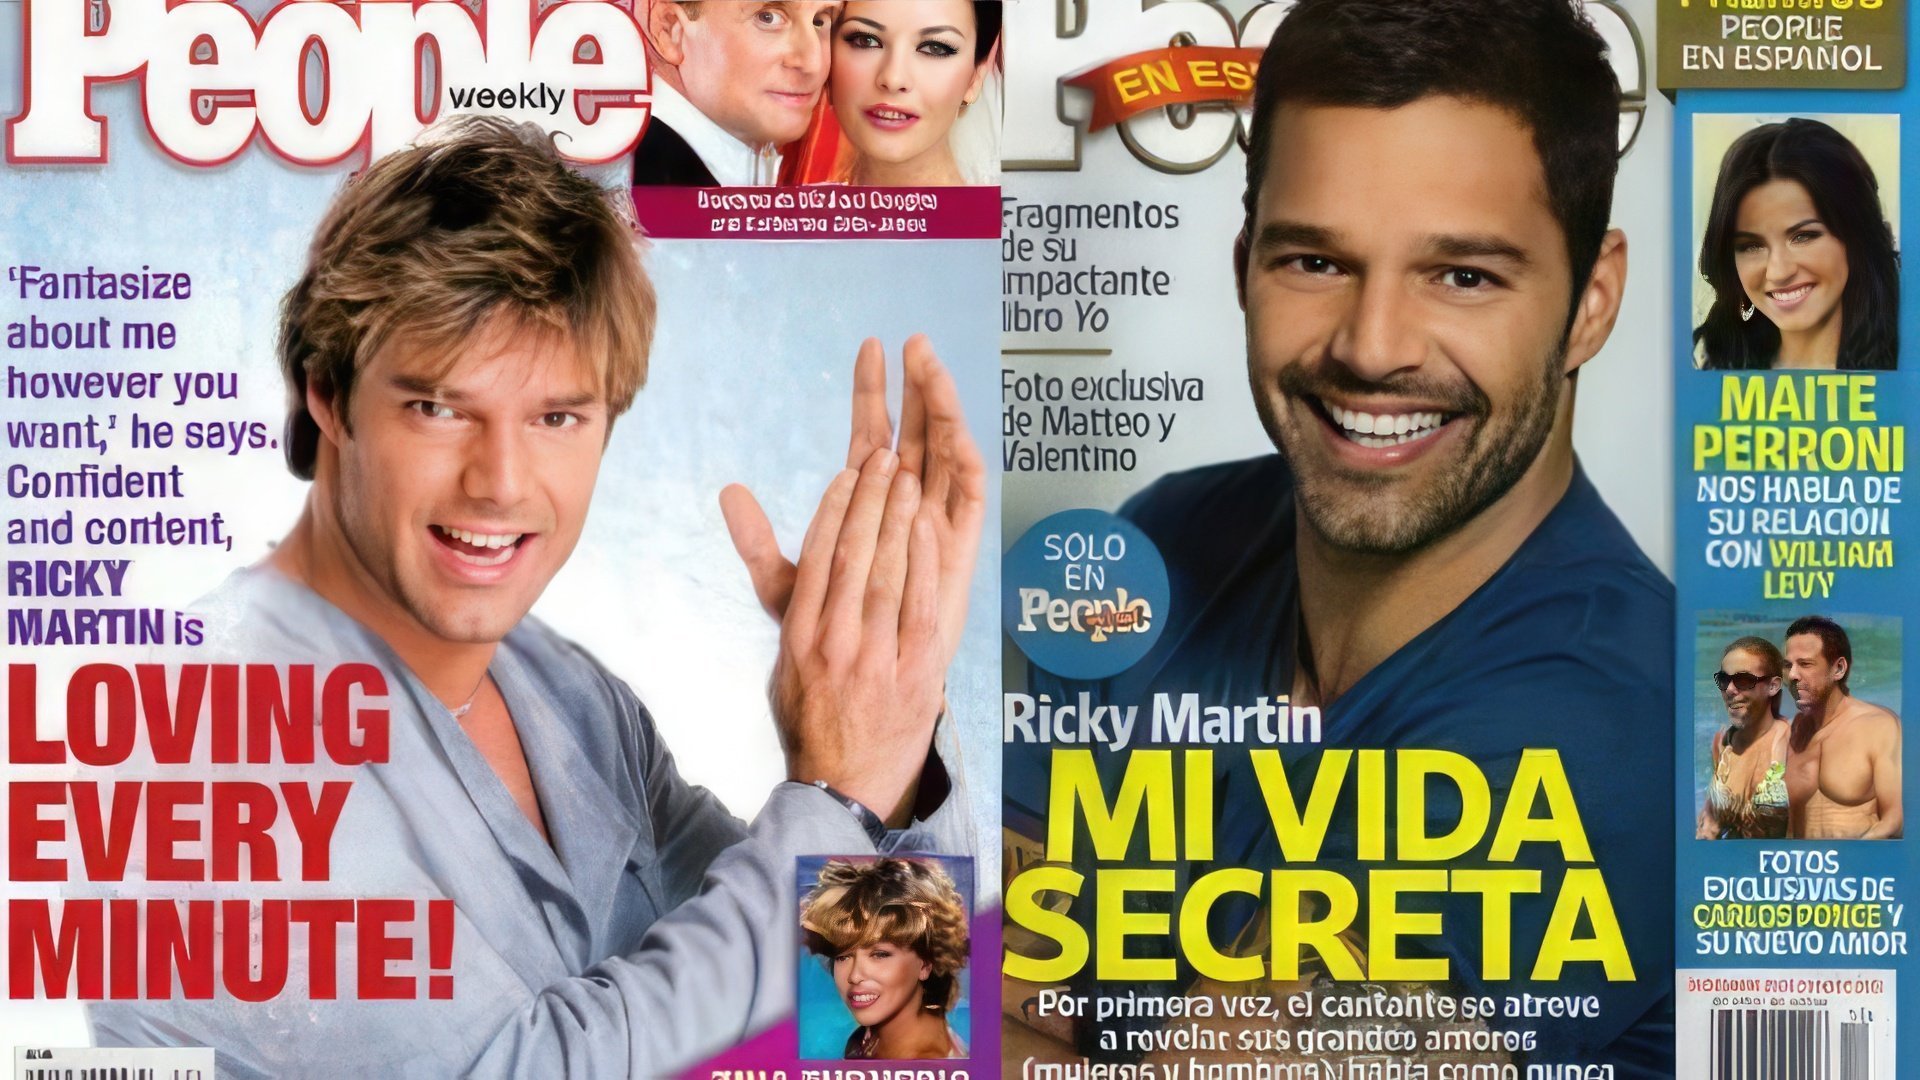 Ricky Martin in People: in his youth and now